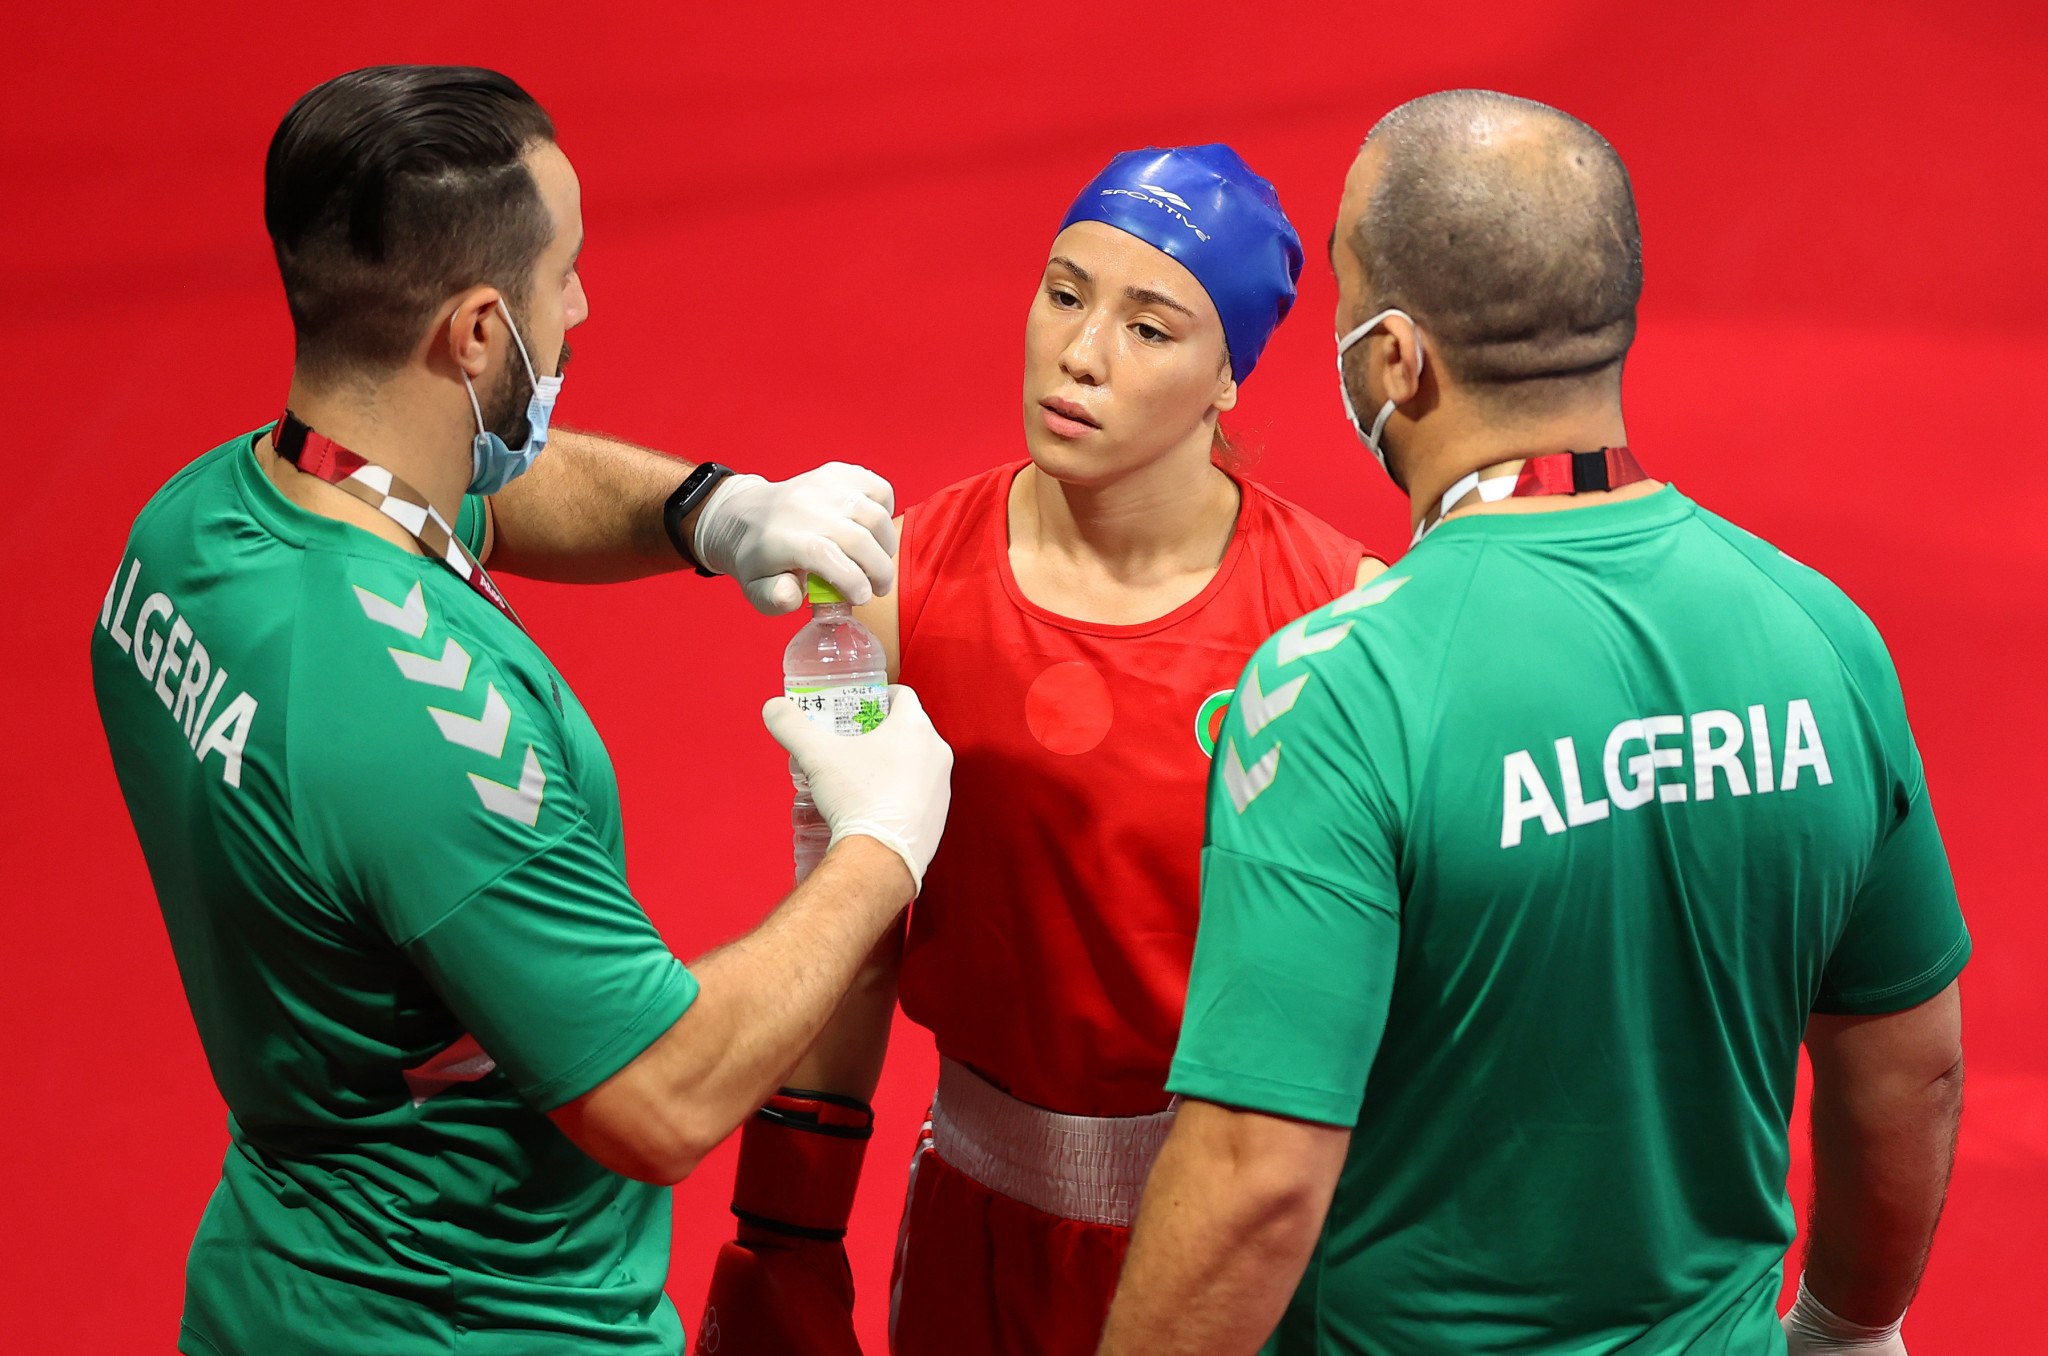 Roumaysa Boualam, centre, was among the boxing gold medallists for Algeria at the Pan Arab Games ©Getty Images